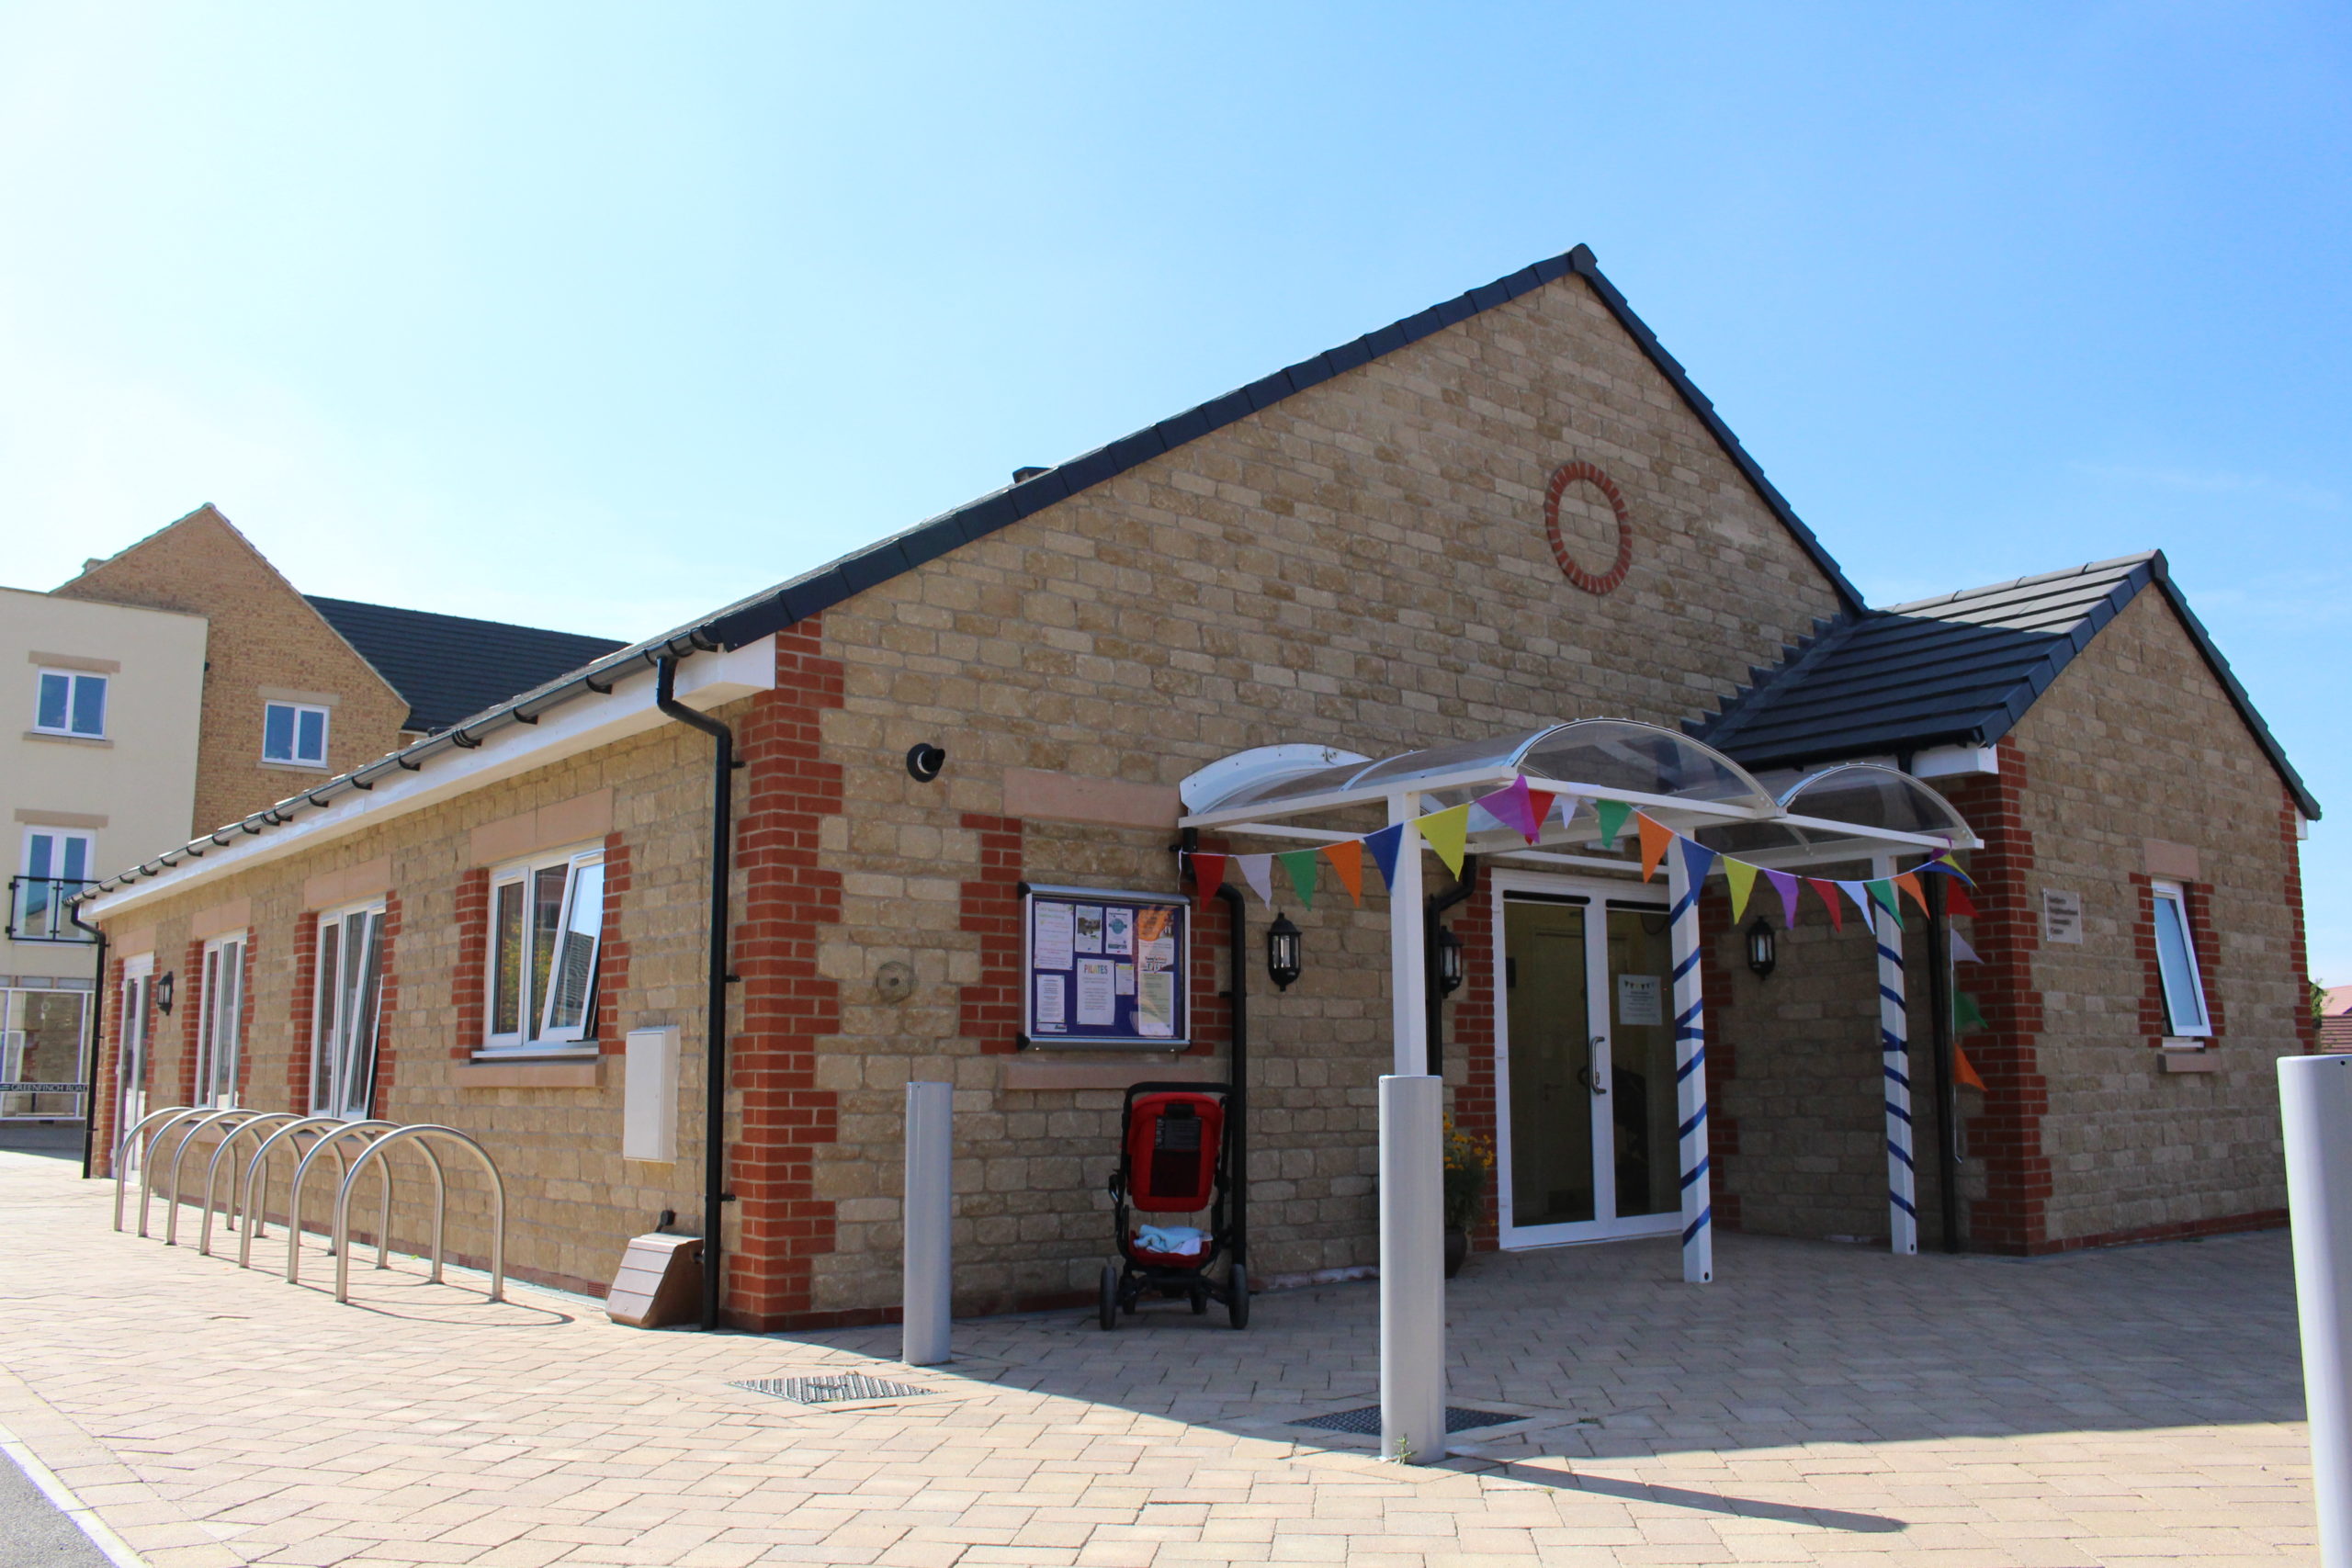 The main entrance to the Northern Community Centre